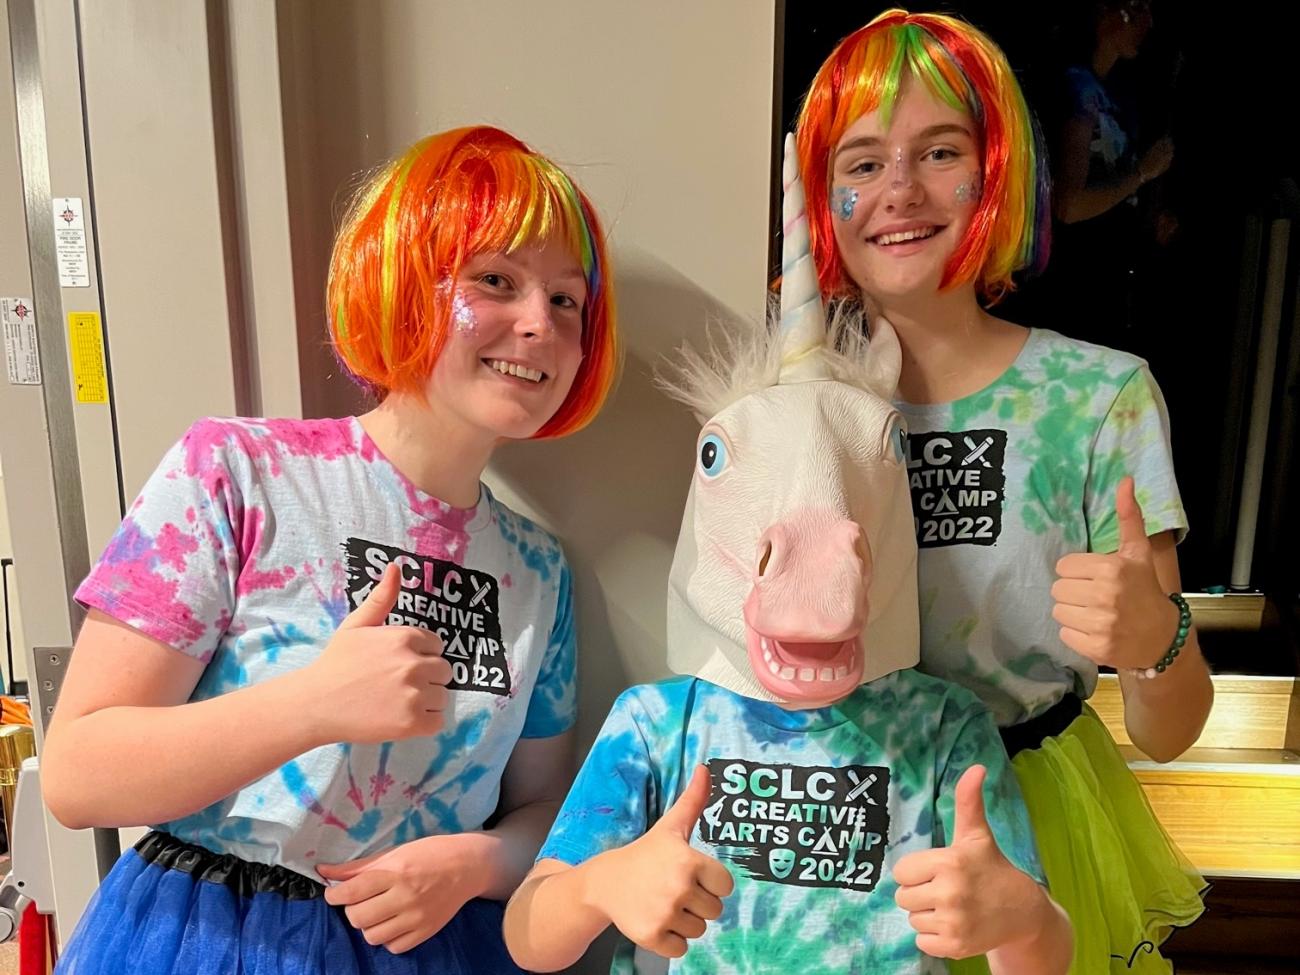 3 students - 2 with orange wigs on and one with a unicorn full face mask